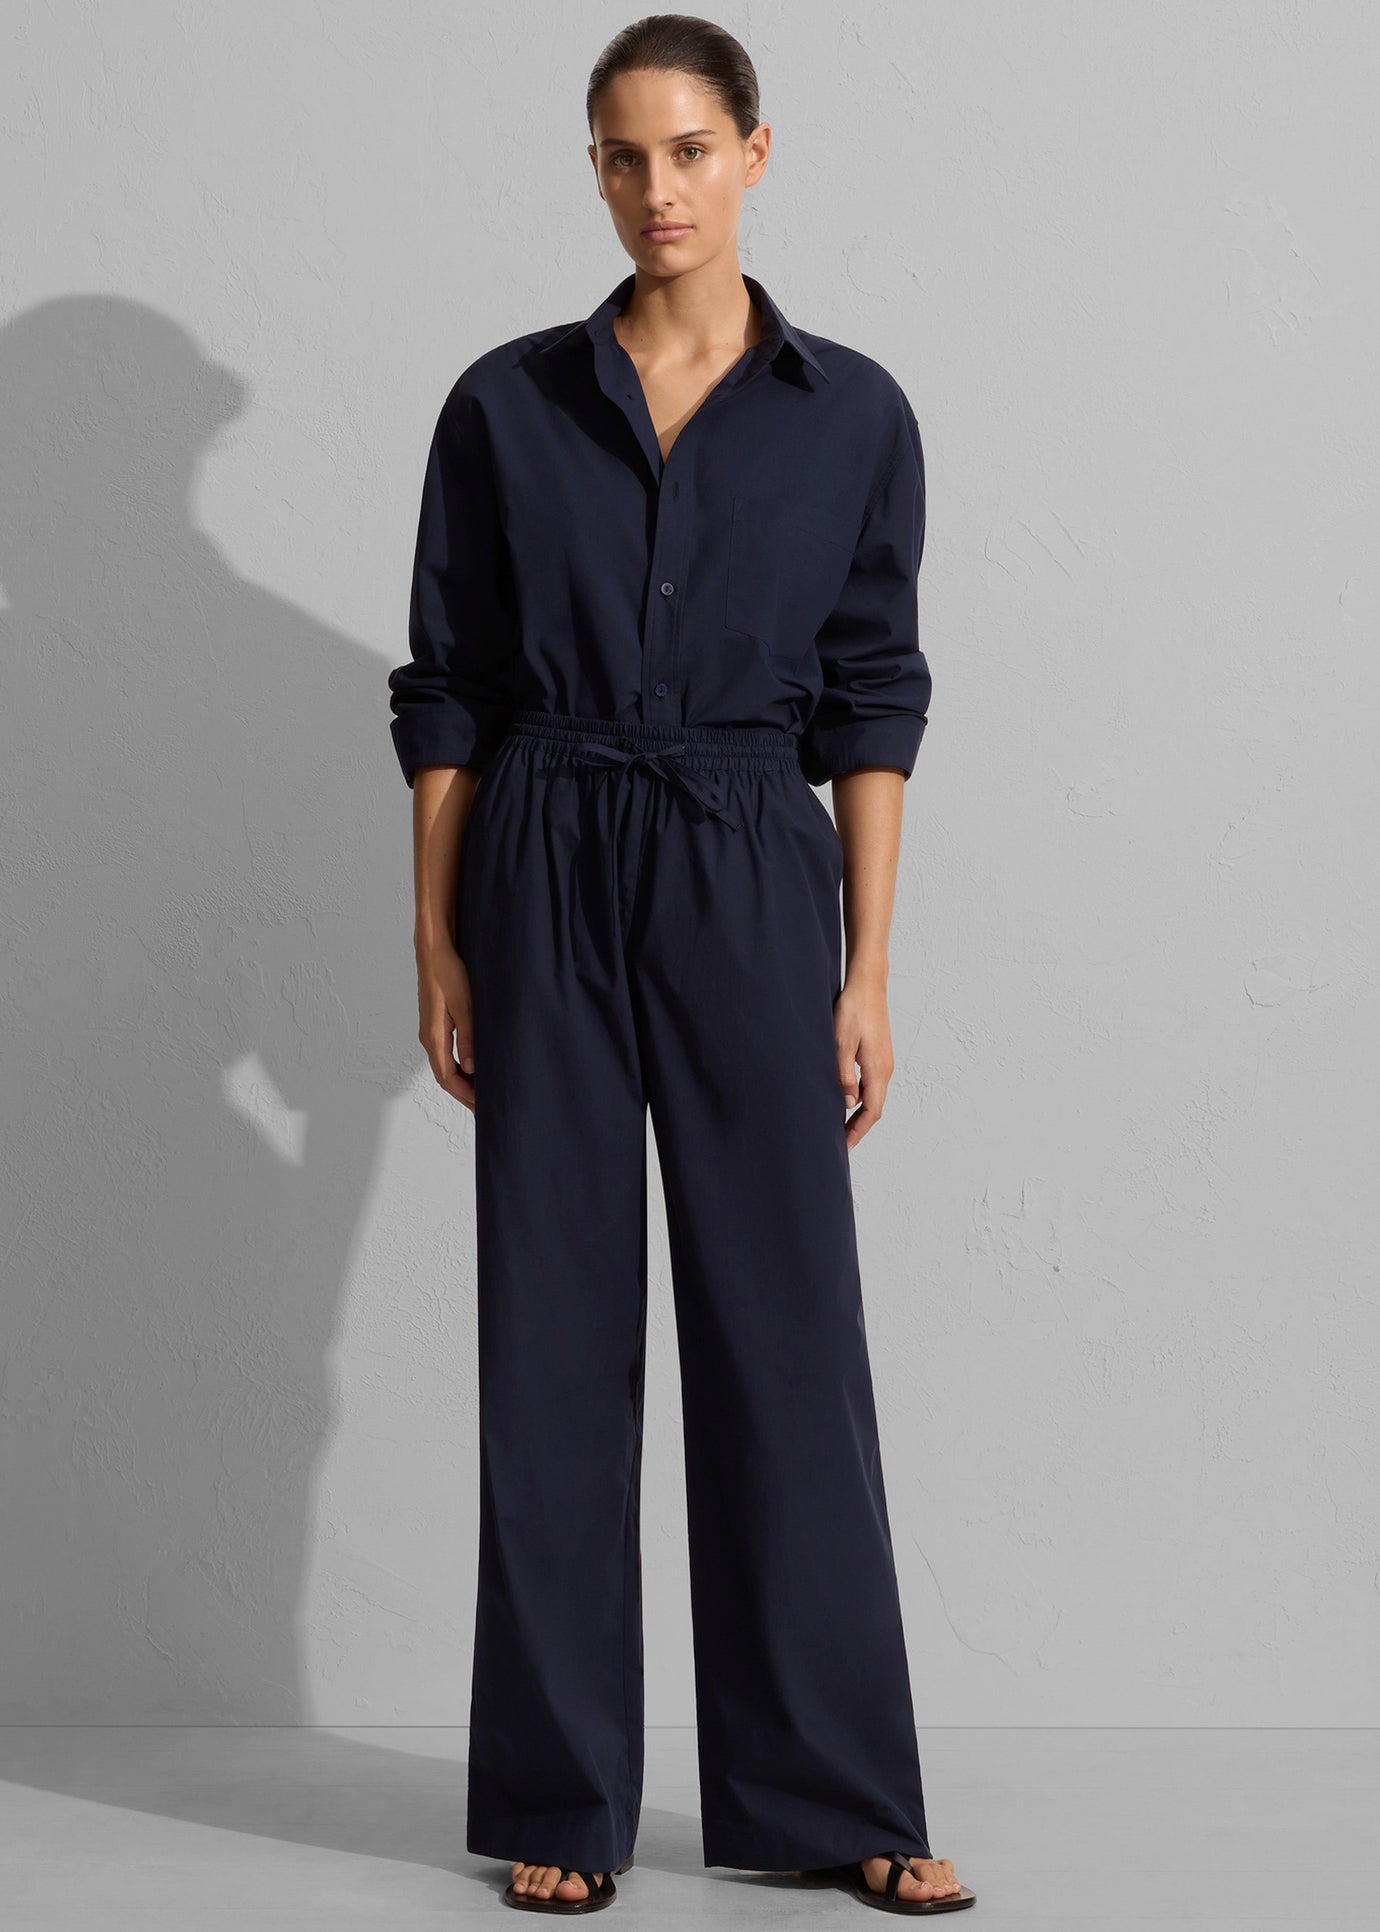 Matteau Relaxed Pant - Navy